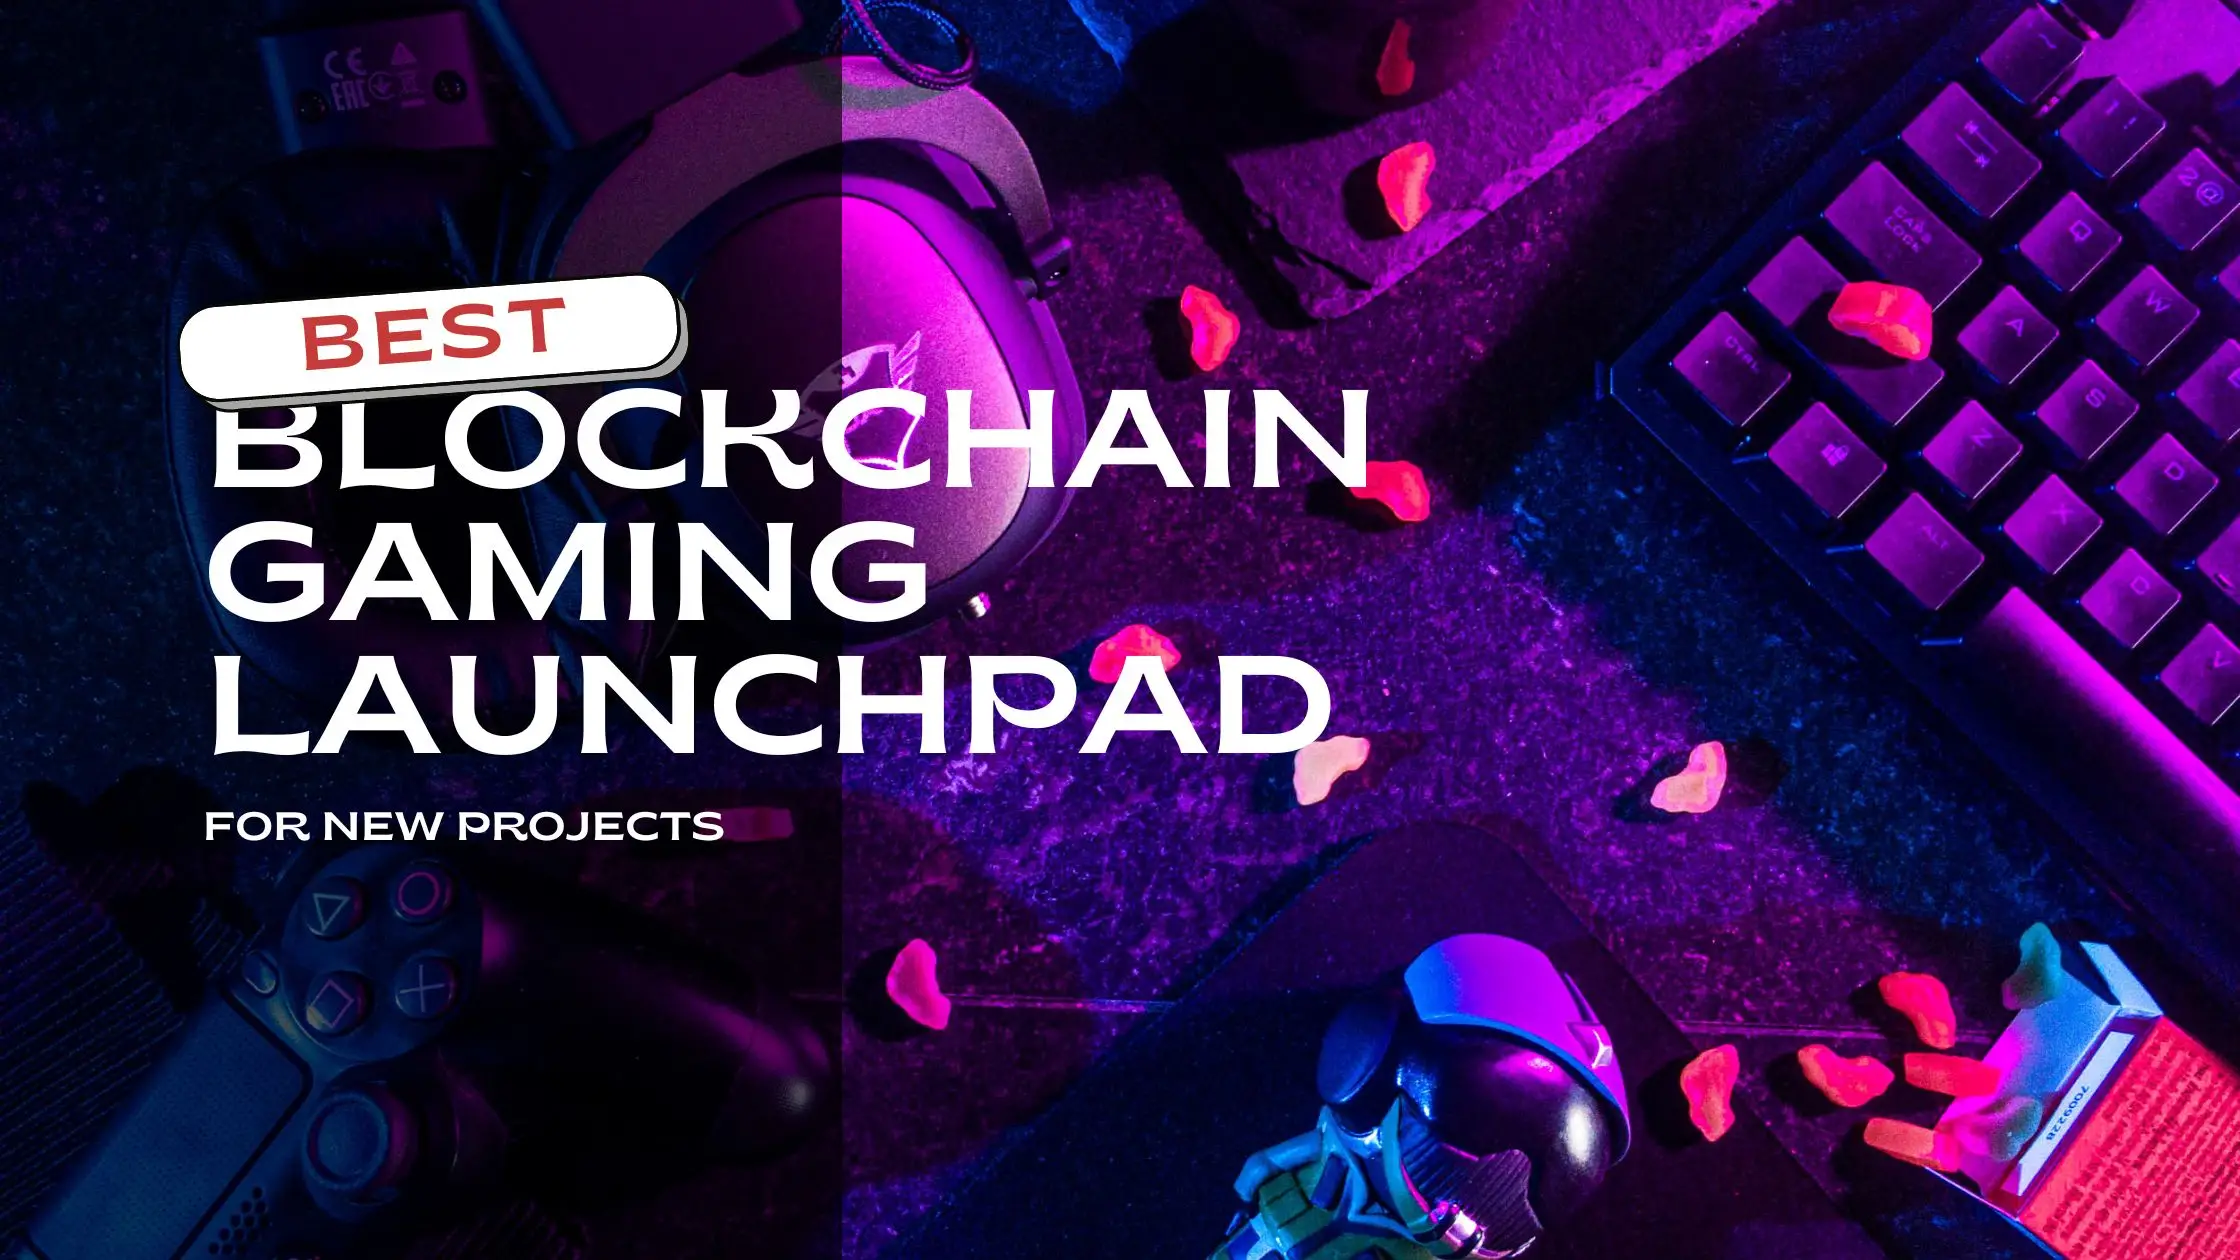 Best blockchain gaming launchpad for new projects